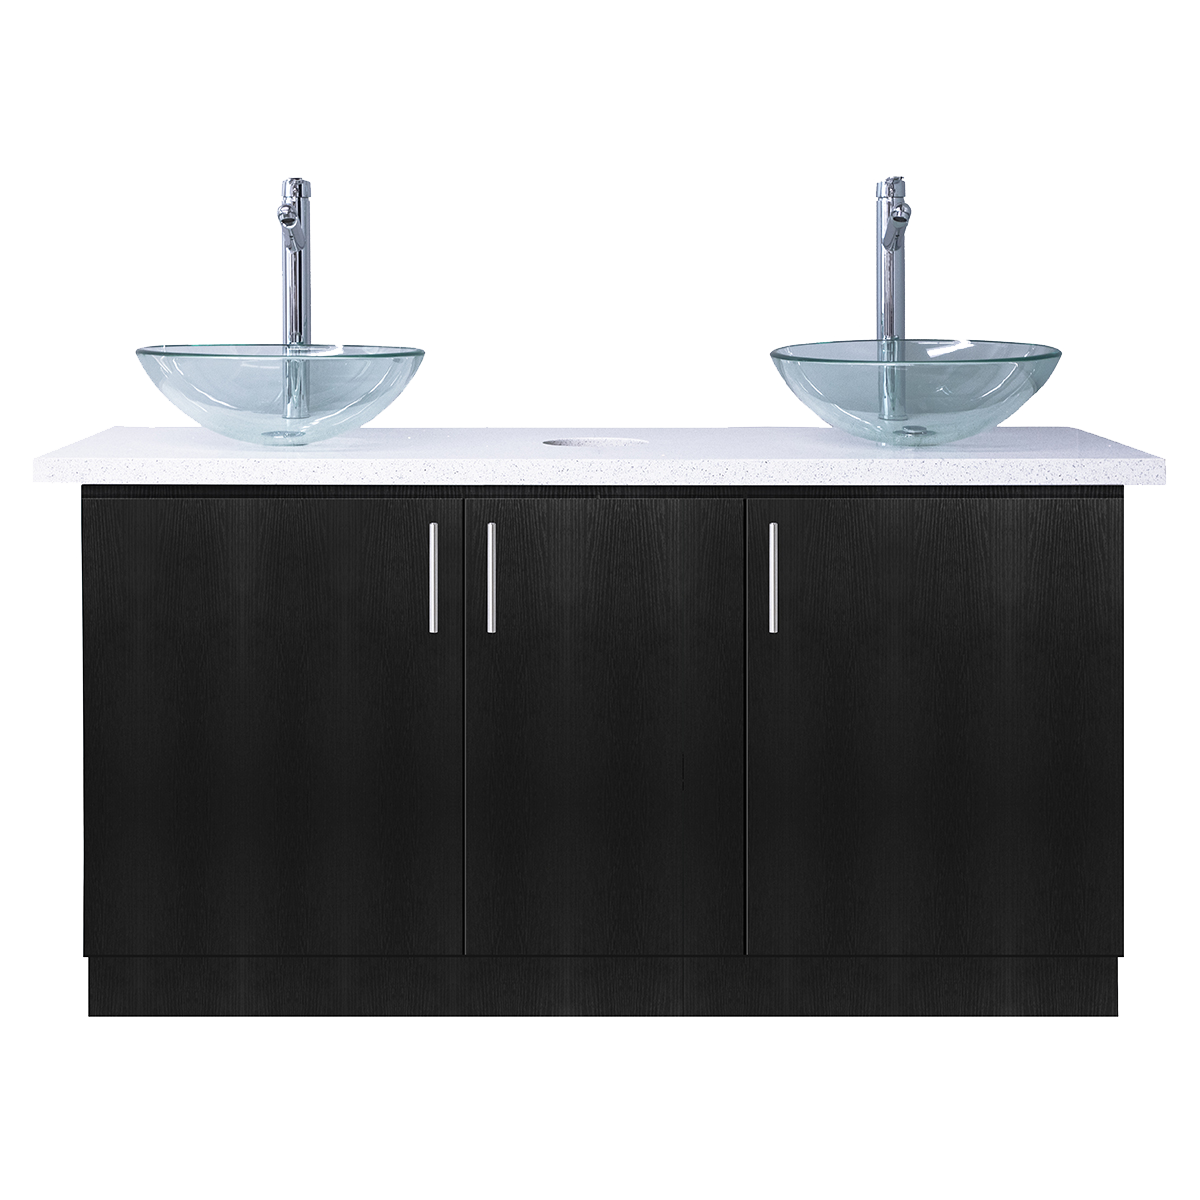 Whale Spa White Double Sink, Handwashing Station with Cabinets for Two Salon Customers | Salon and Spa Equipment